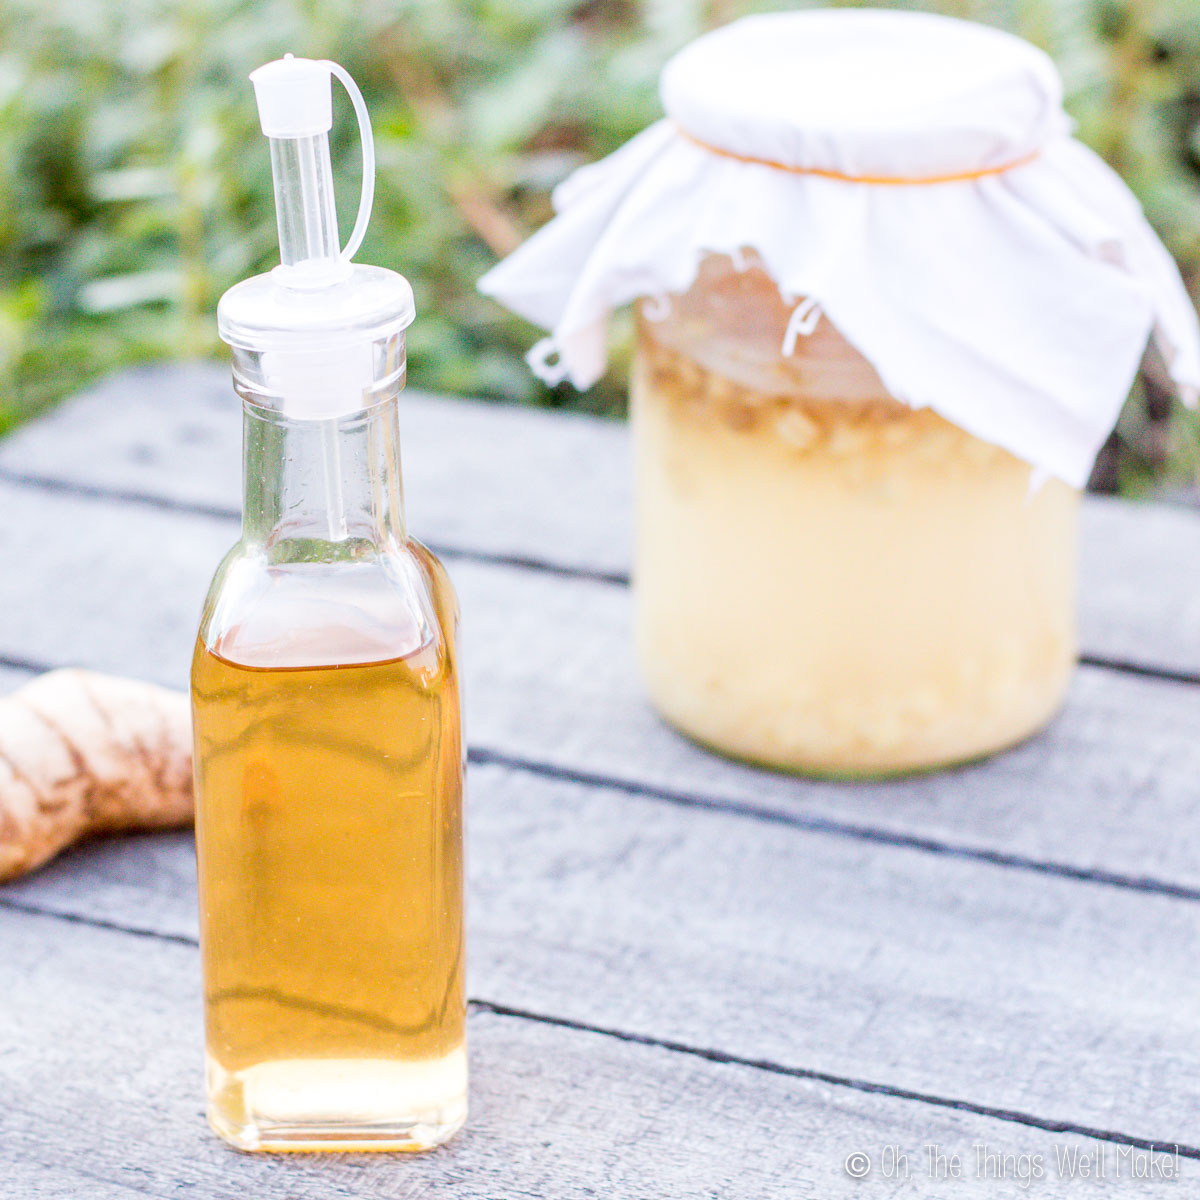 A bottle of ginger vinegar in front of a jar with an active ginger bug